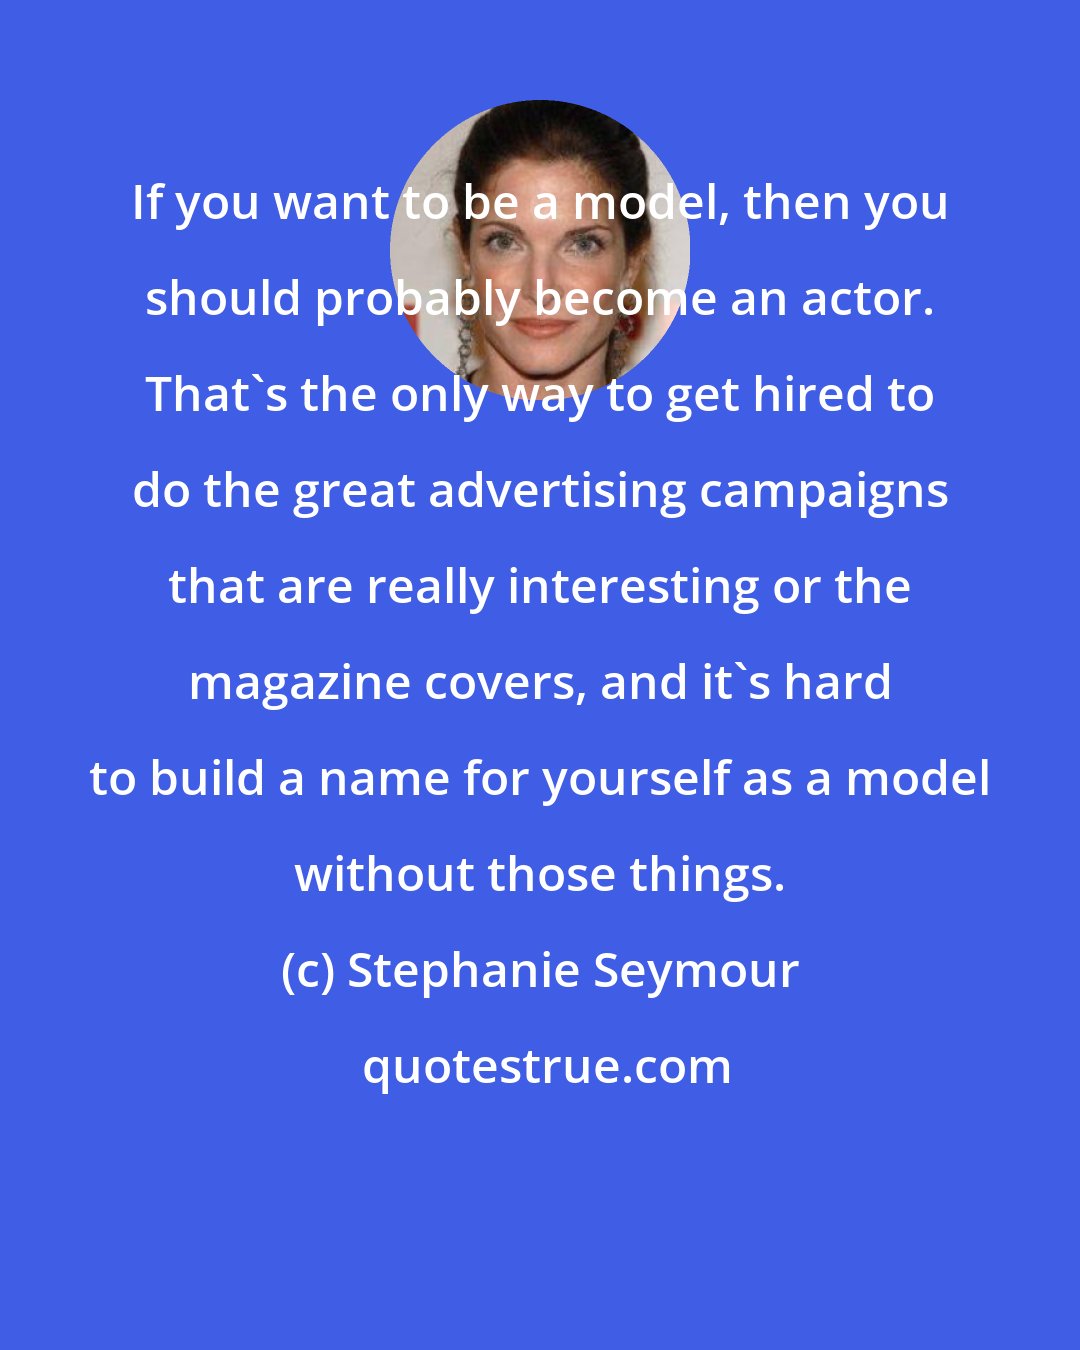 Stephanie Seymour: If you want to be a model, then you should probably become an actor. That's the only way to get hired to do the great advertising campaigns that are really interesting or the magazine covers, and it's hard to build a name for yourself as a model without those things.